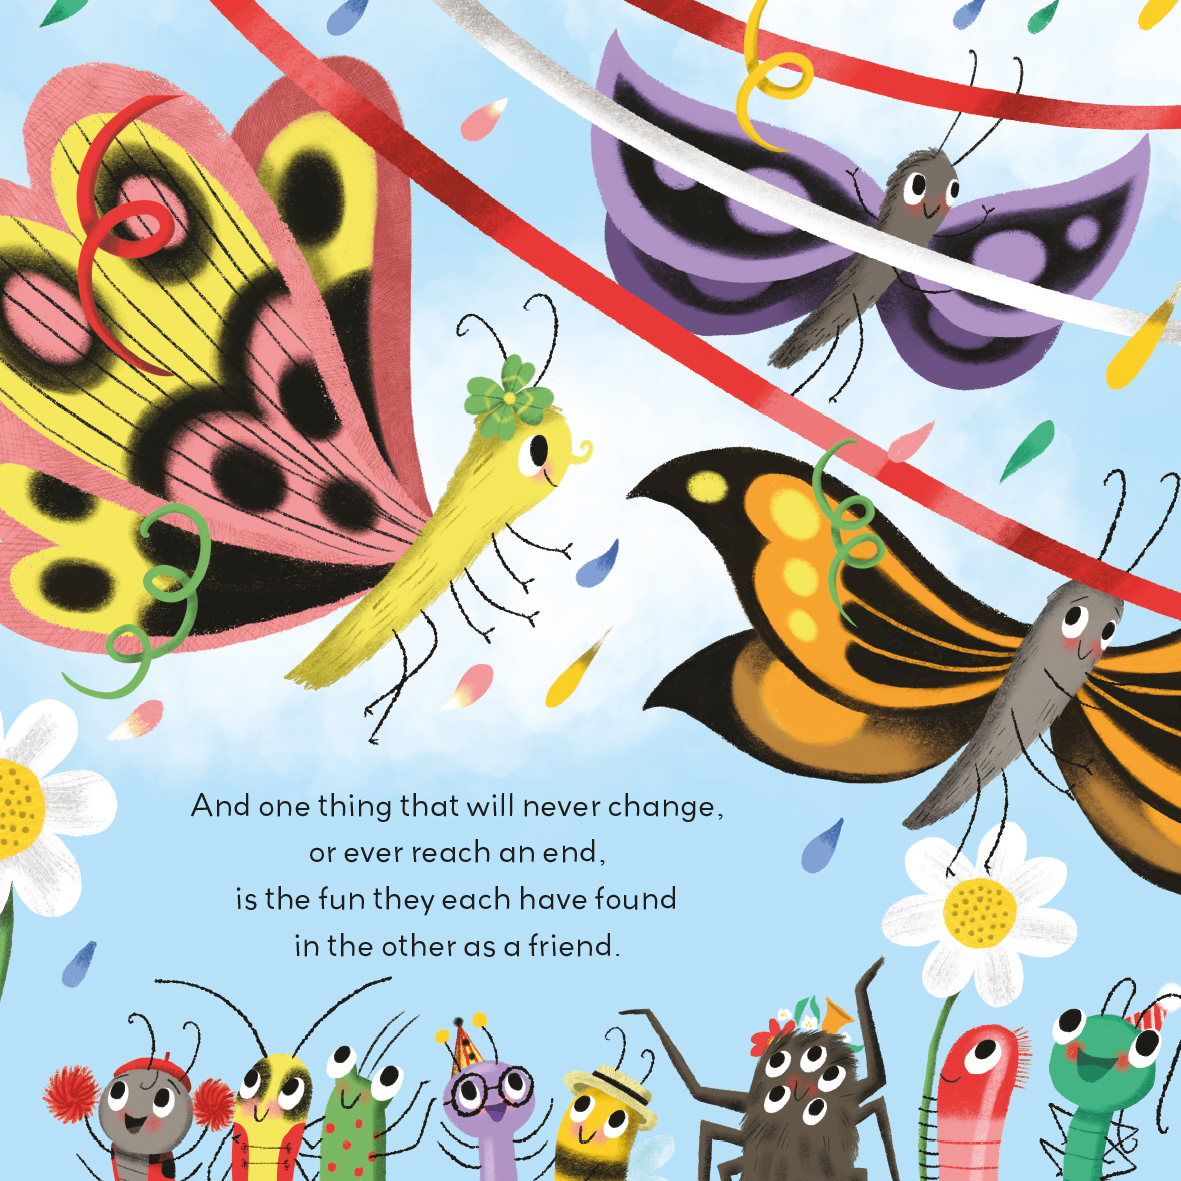 Beautiful illustrations by Nila Aye for You Can Do It, Clover! The first book in the new Little Bugs, Big Feelings series written by Hollie Hughes. 🐛 🍓 🪱 @nilaaye @holliejhughes @HachetteKids